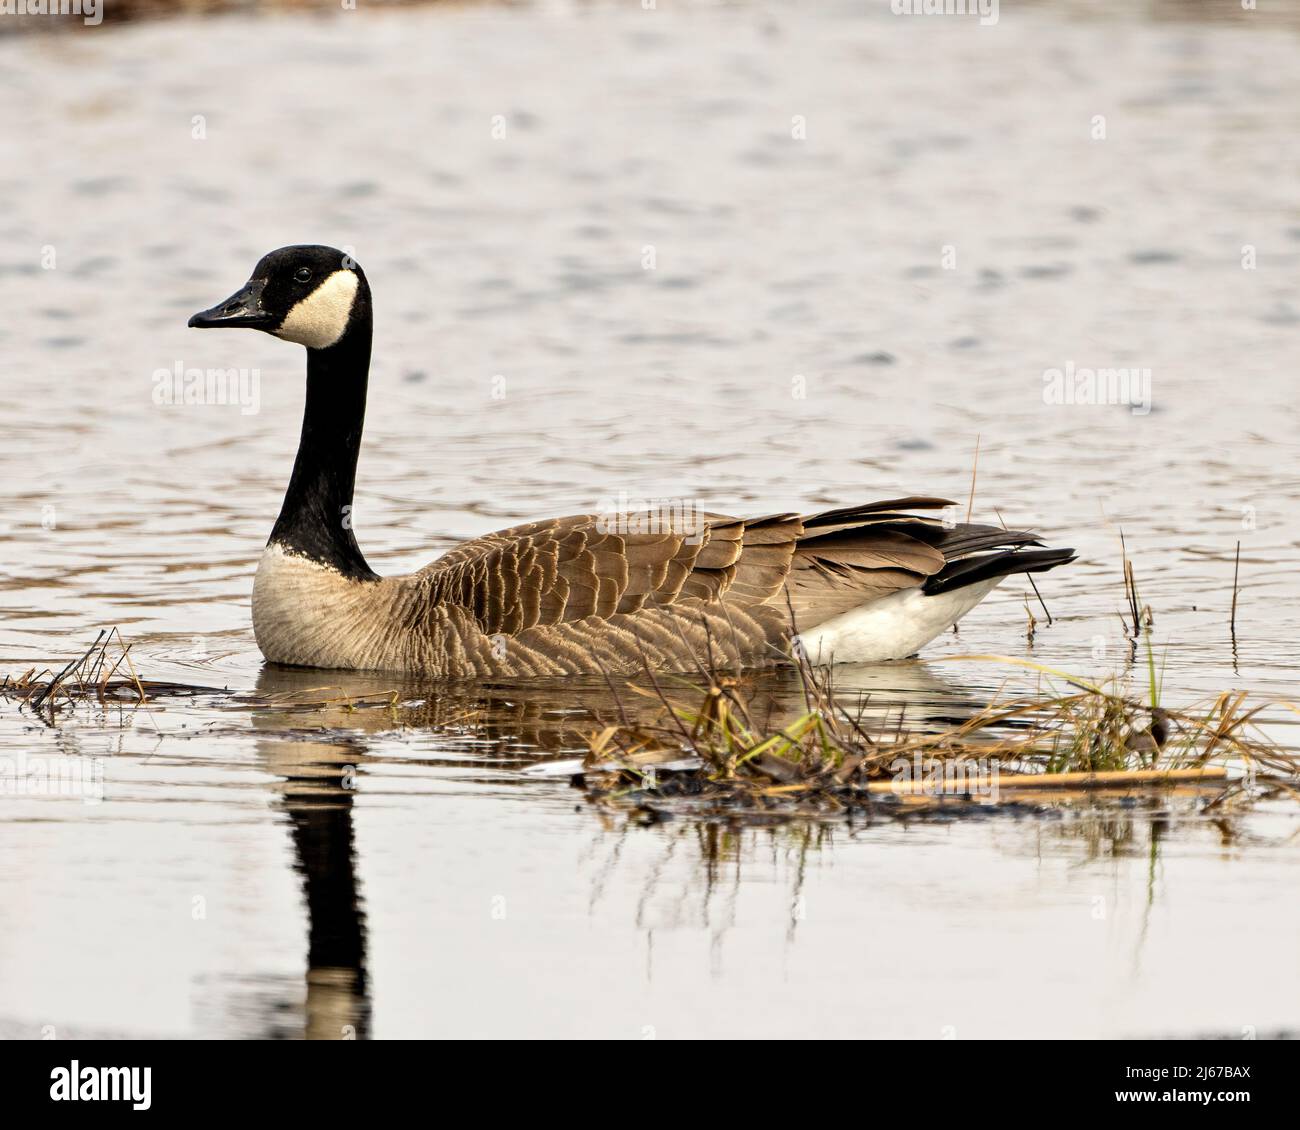 Canada Goose swimming on ice water in the springtime in their environment and habitat surrounding. Geese. Stock Photo